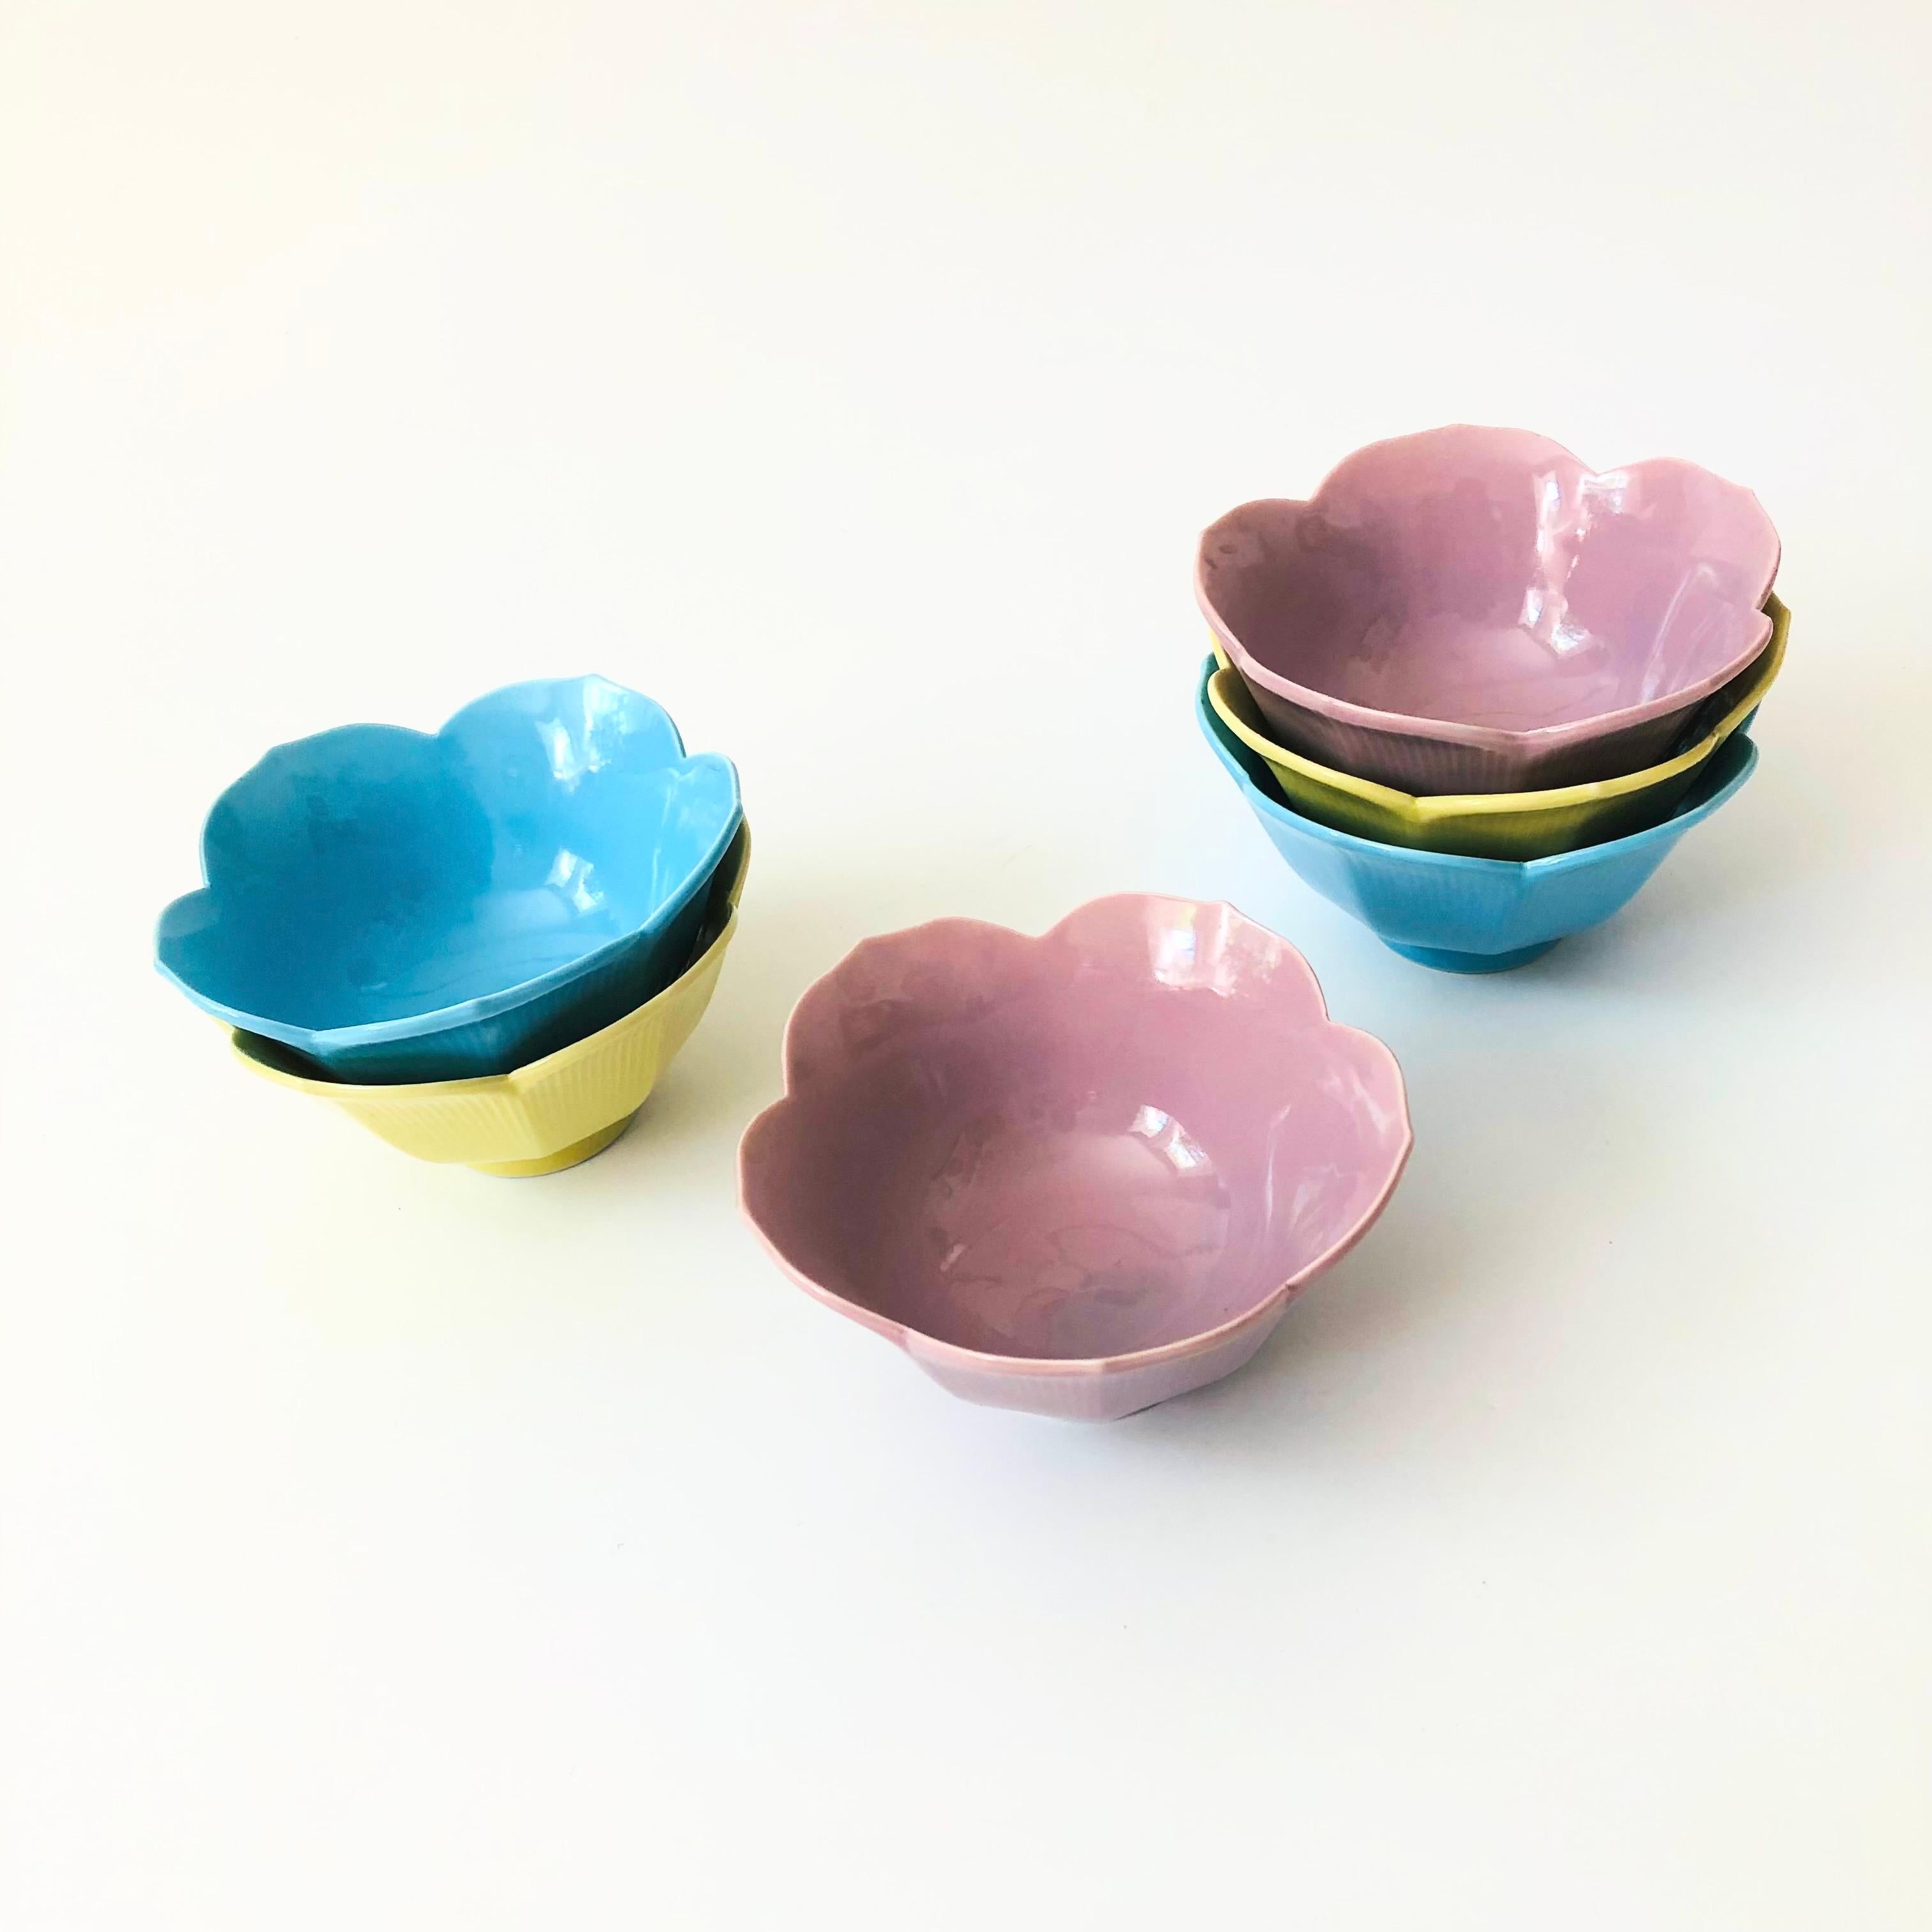 A set of 6 colorful ceramic vintage lotus bowls. 2 of each, finished in blue, yellow, and lavender glazes. Perfect for snacks or using as rice bowls.

